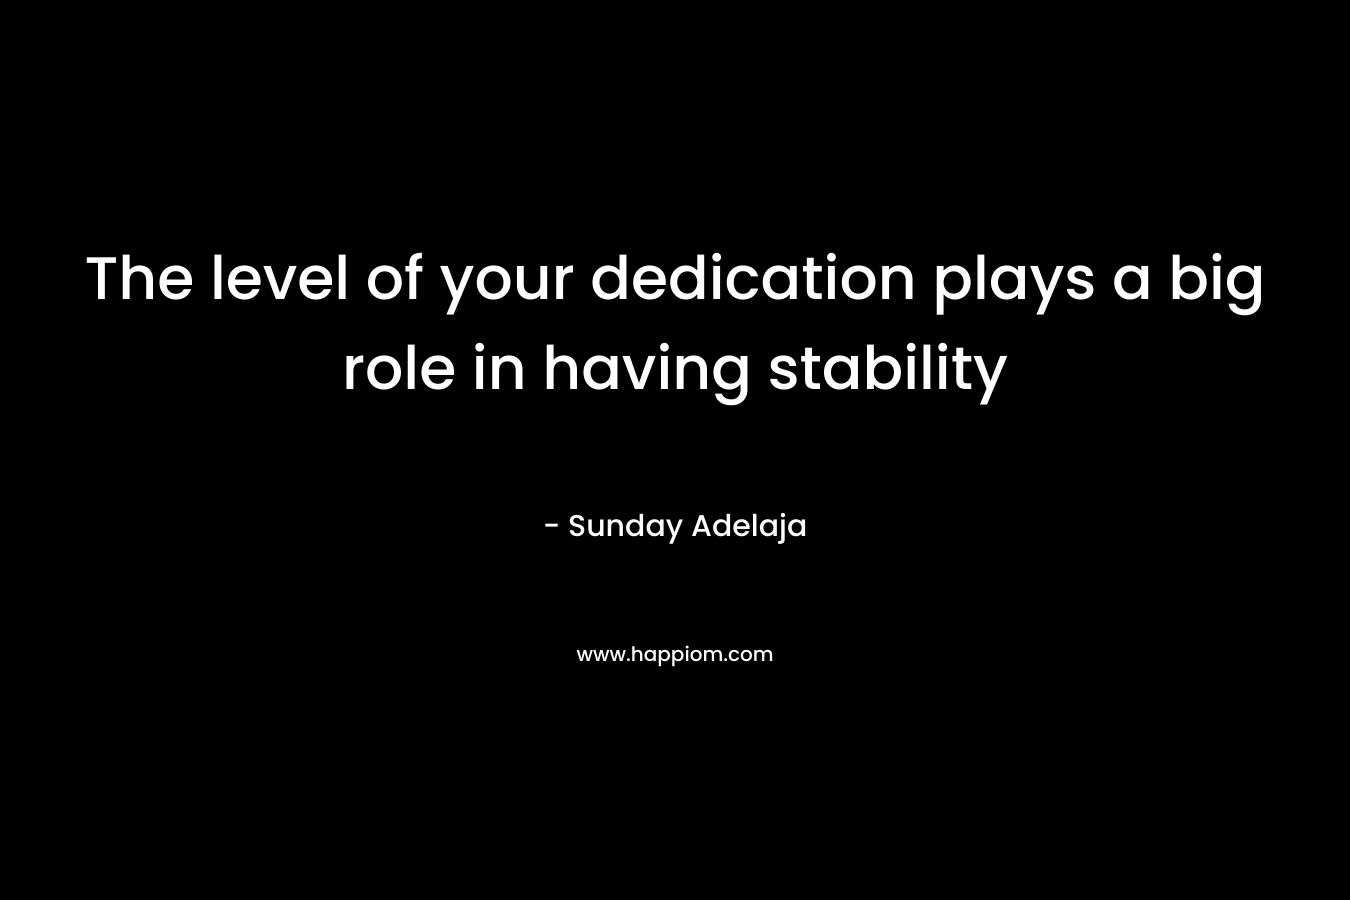 The level of your dedication plays a big role in having stability